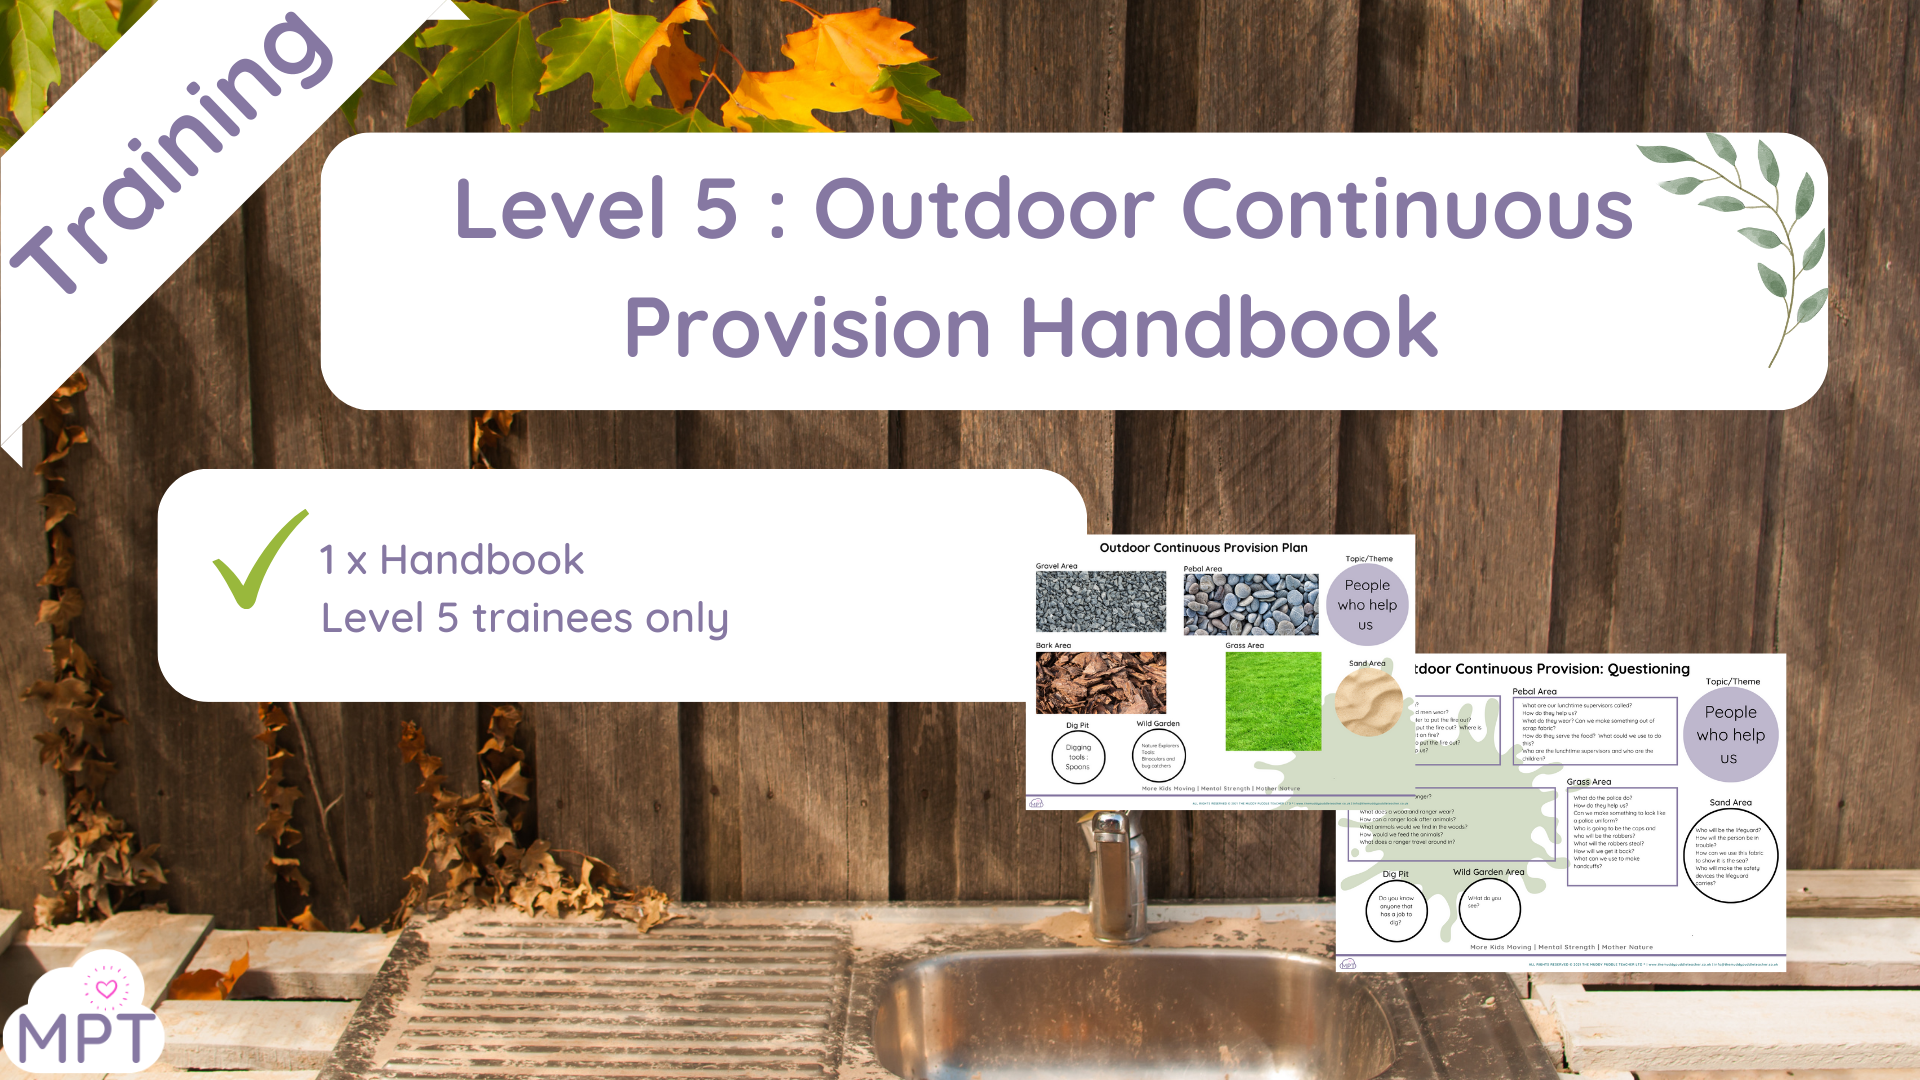 Level 5 Outdoor continuous provision training